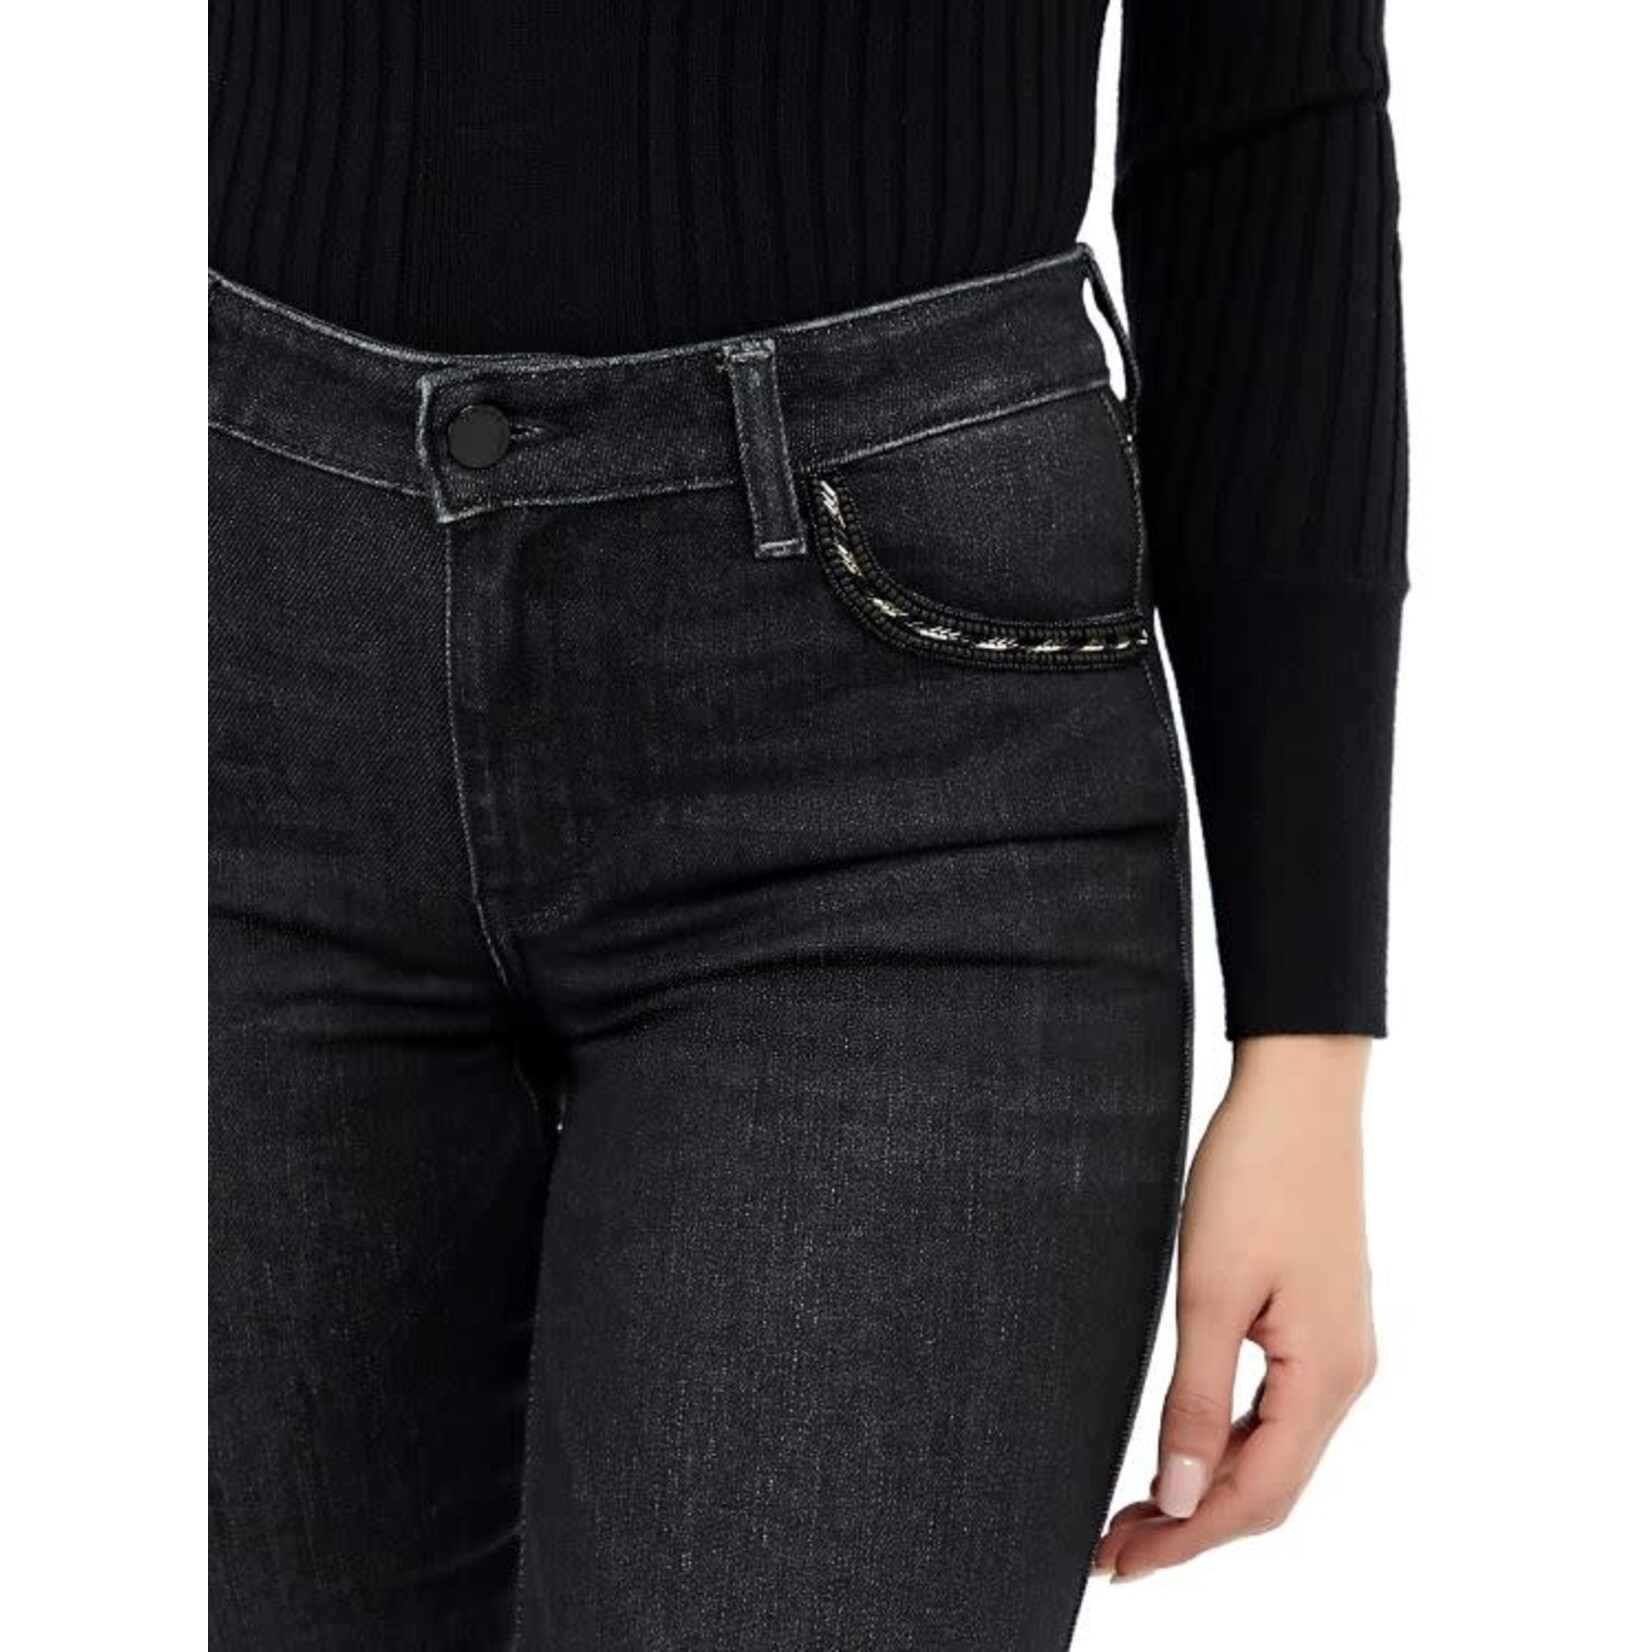 Guess Sexy Mid Rise Straight Leg Jean